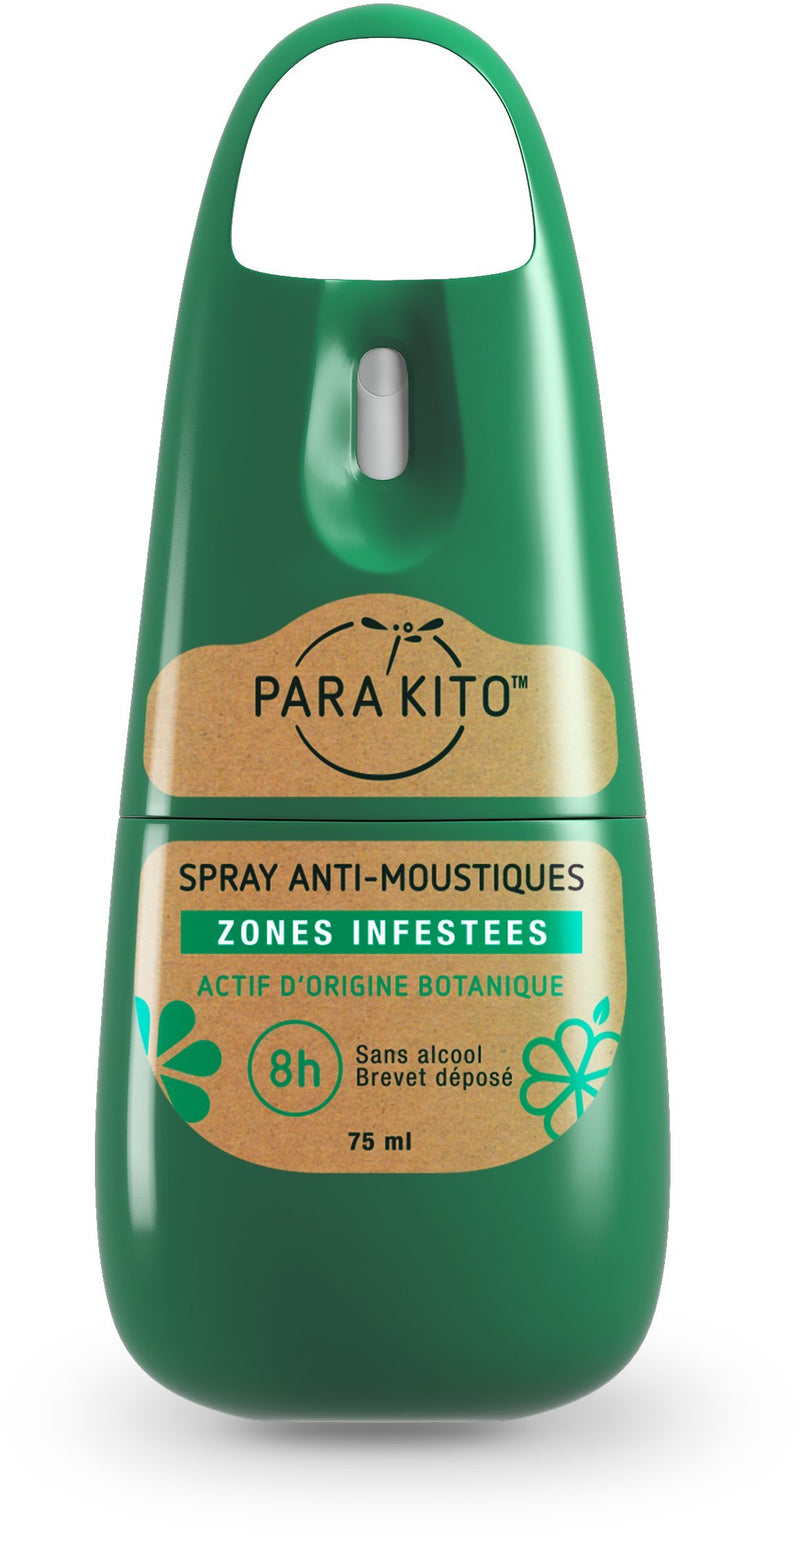 Parakito Mosquito Repellent Spray Infested Areas 75ml